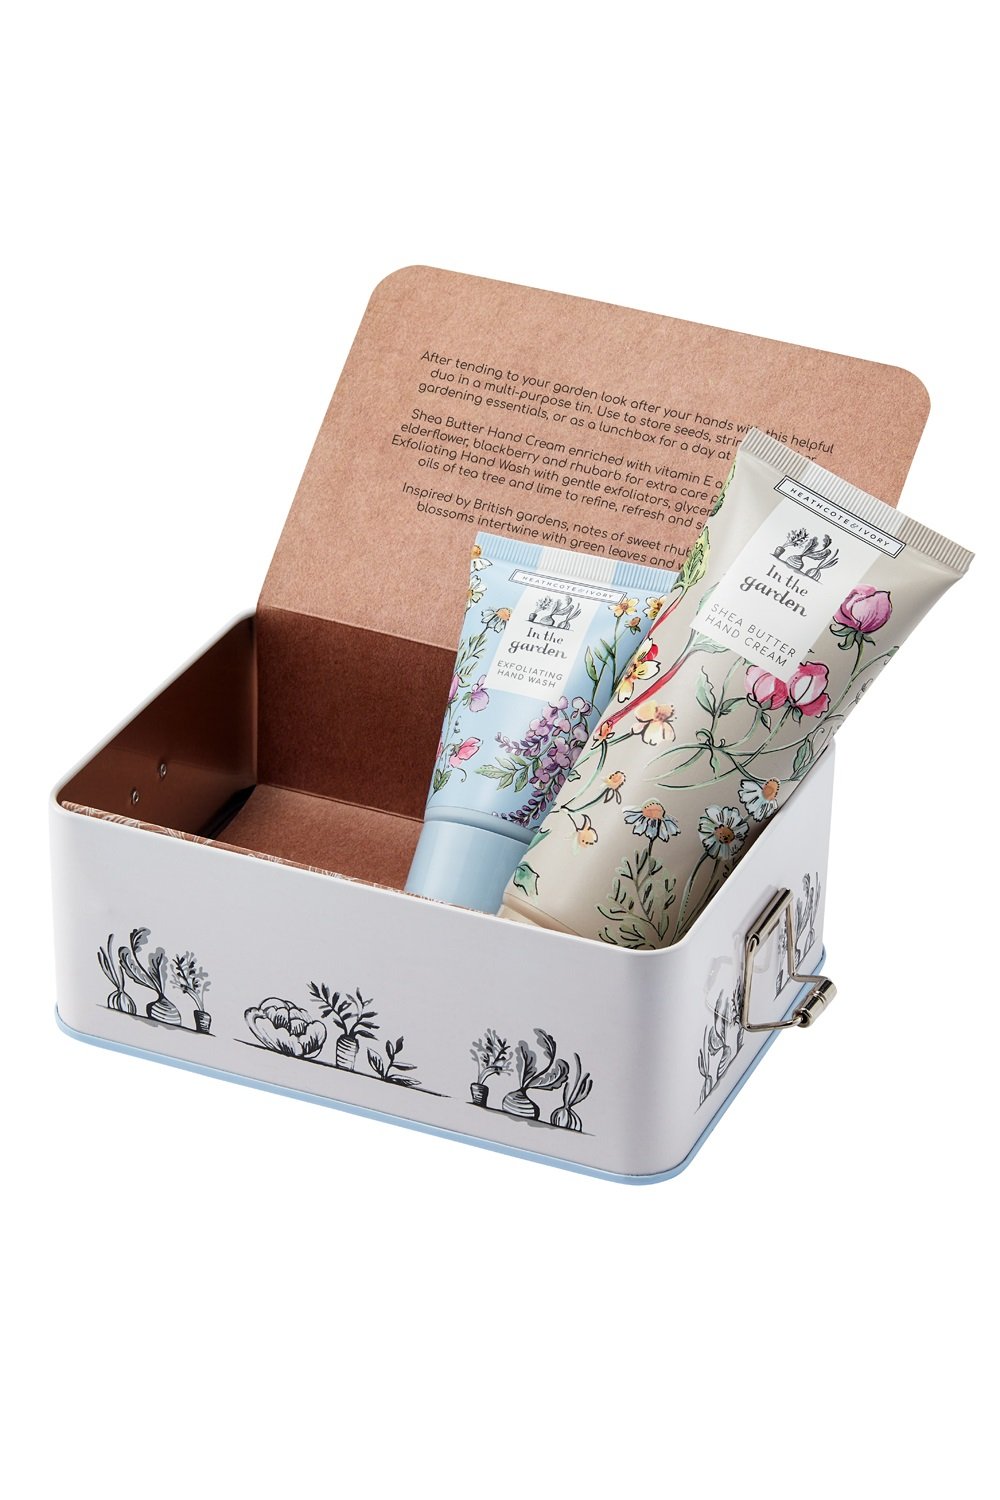  Heathcote & Ivory - In The Garden Hand Care Tin, Image 4 of 5